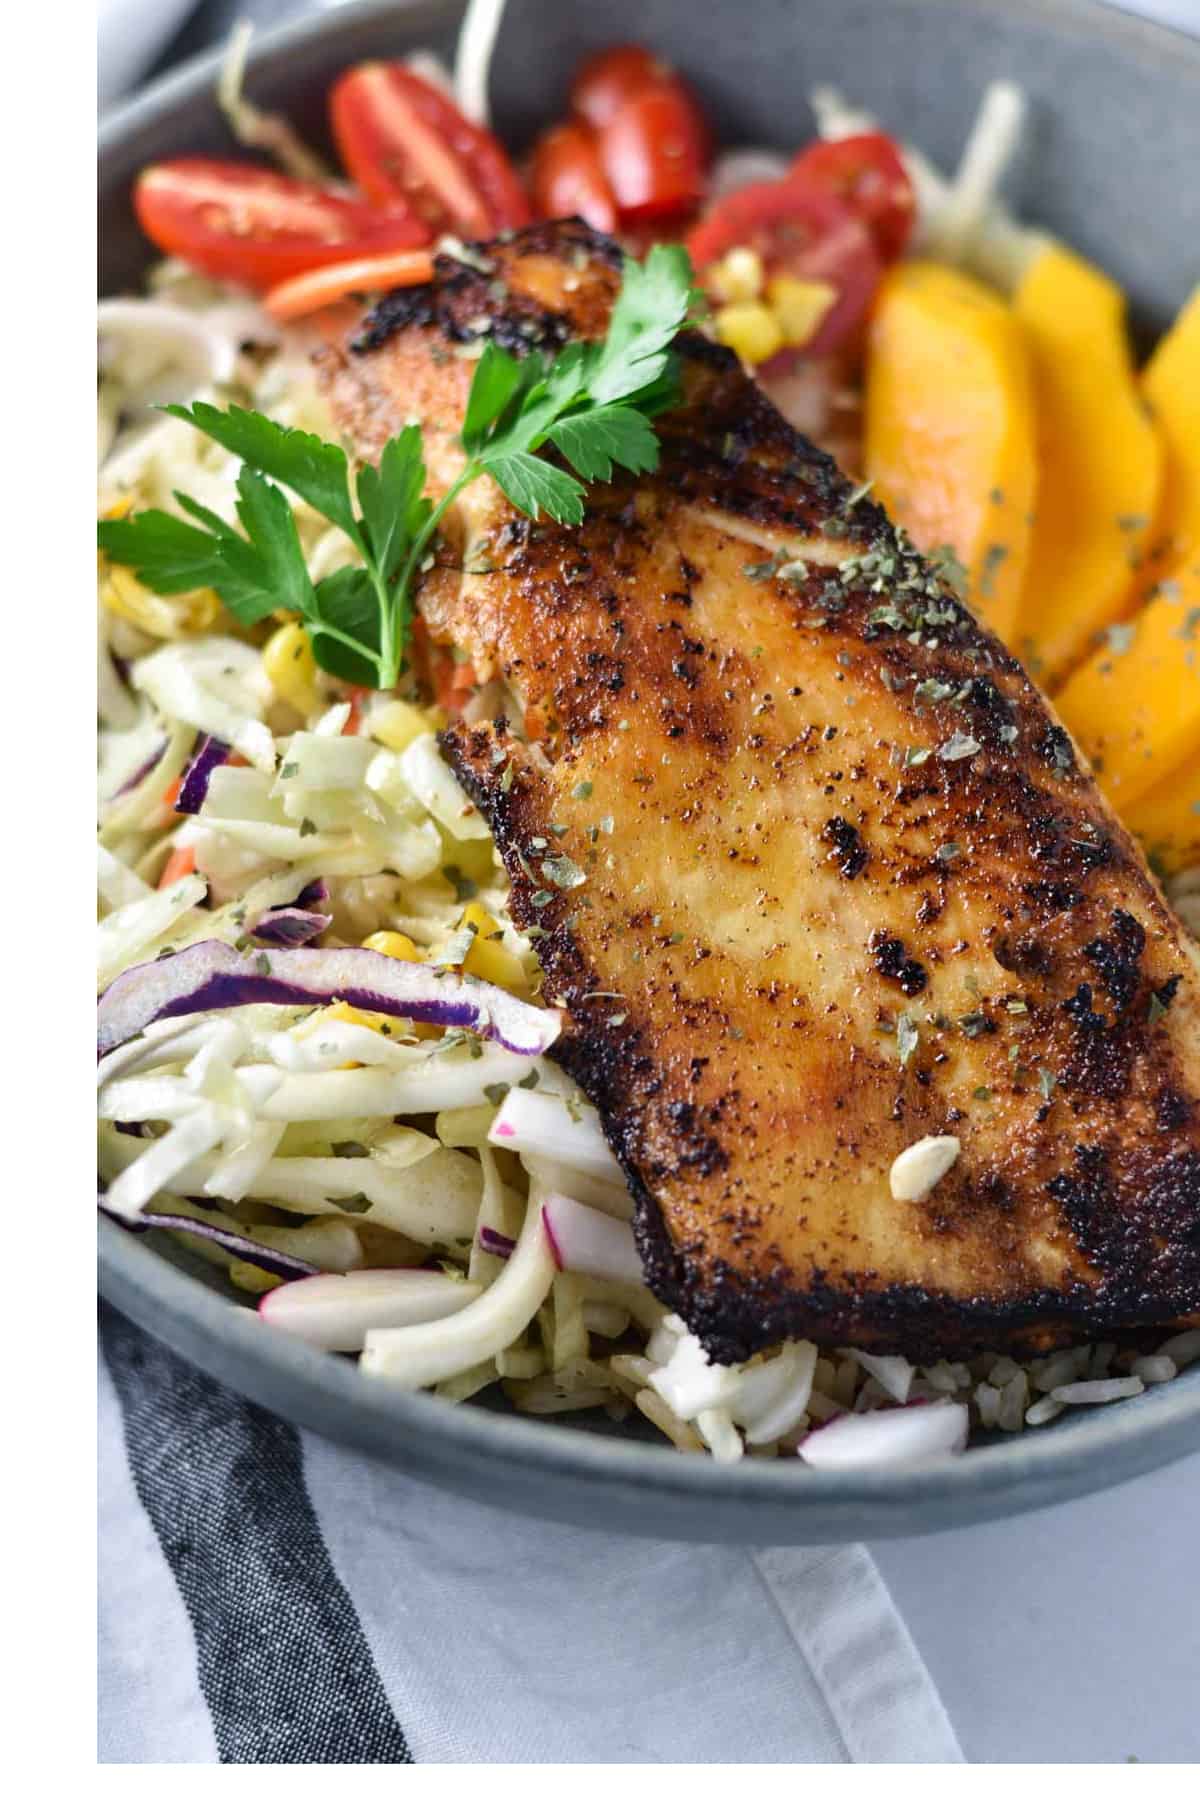 Seared Cobia fillet next to slaw and sliced mangoes.